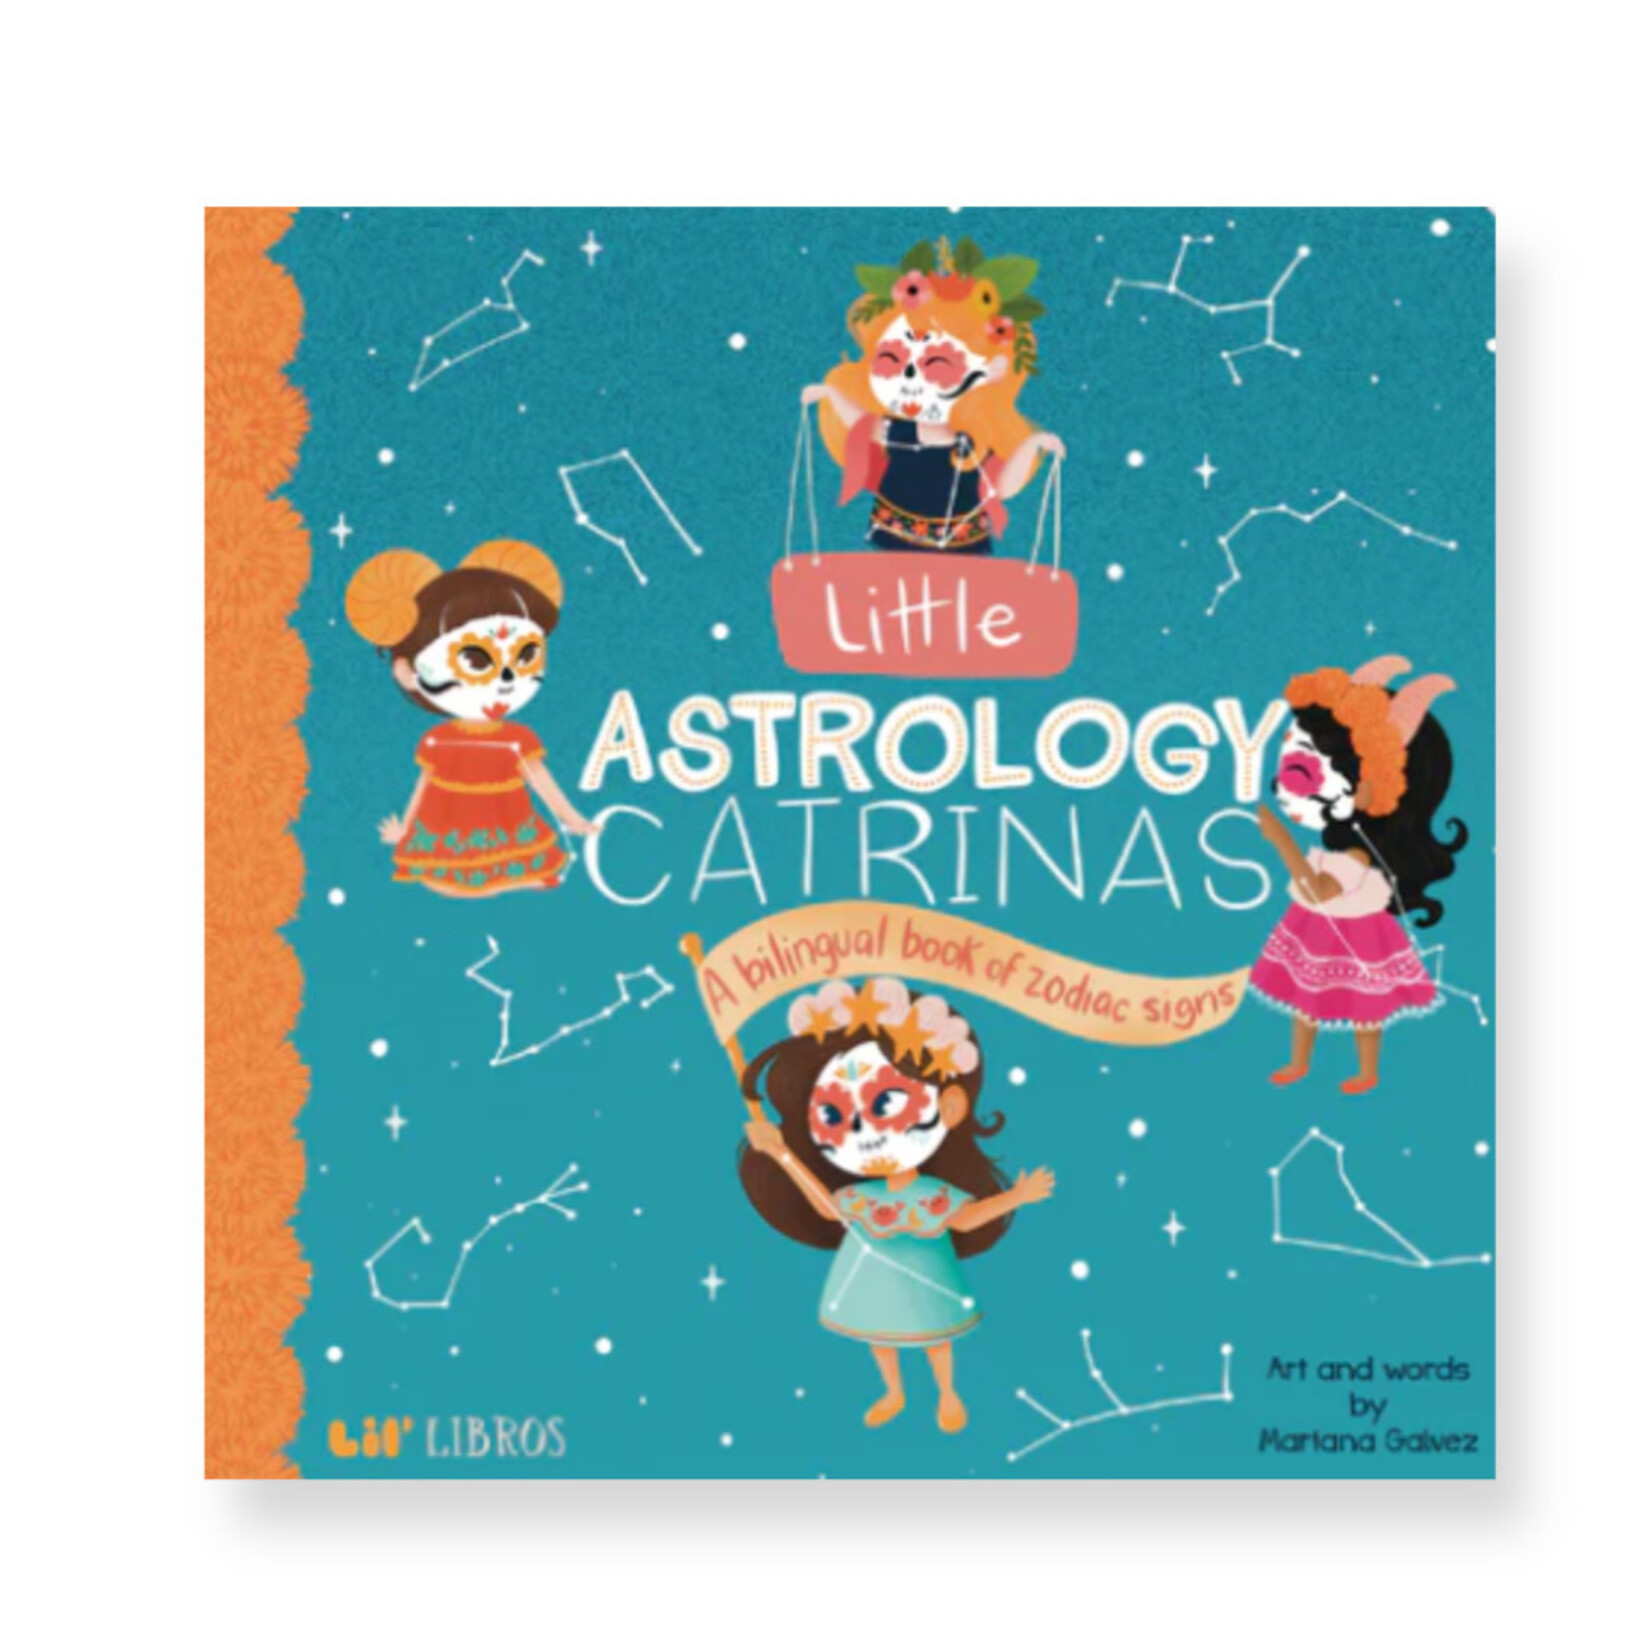 LIL' LIBROS LITTLE ASTROLOGY CATRINAS